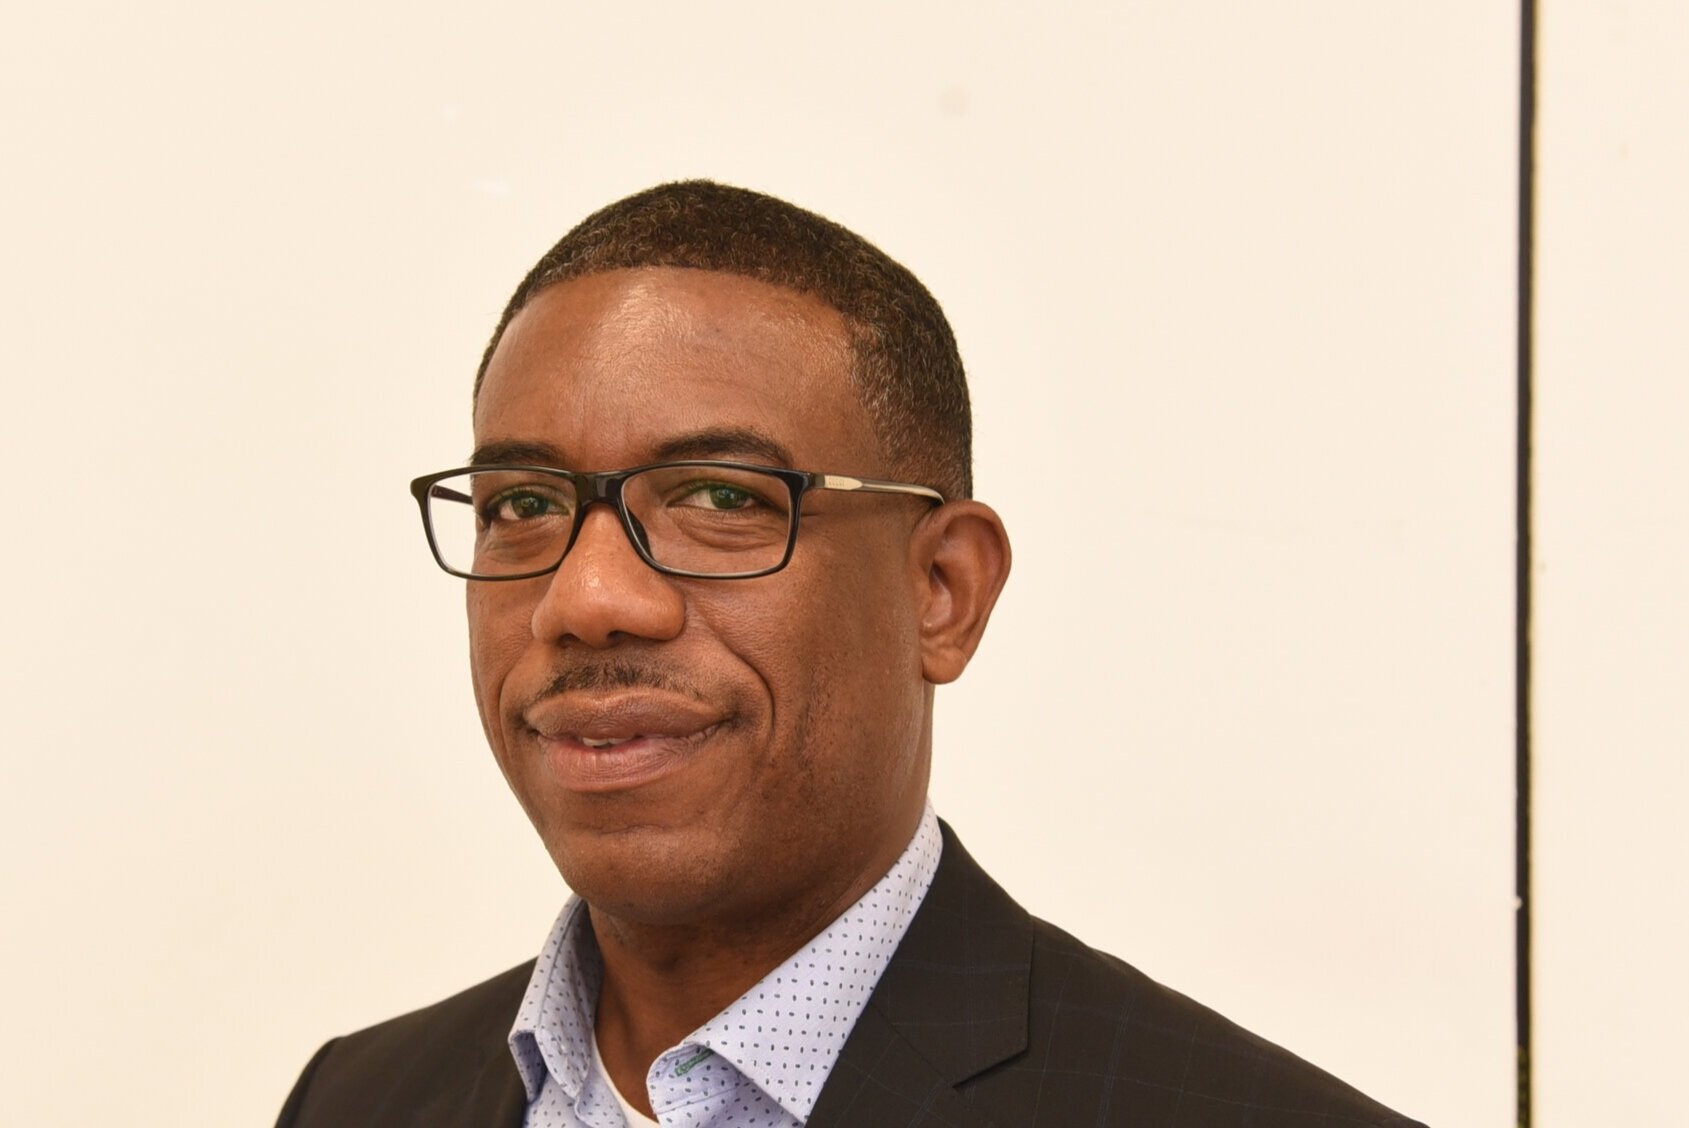 Halton Public School Board selects Curtis Ennis as its first Black Director of Education